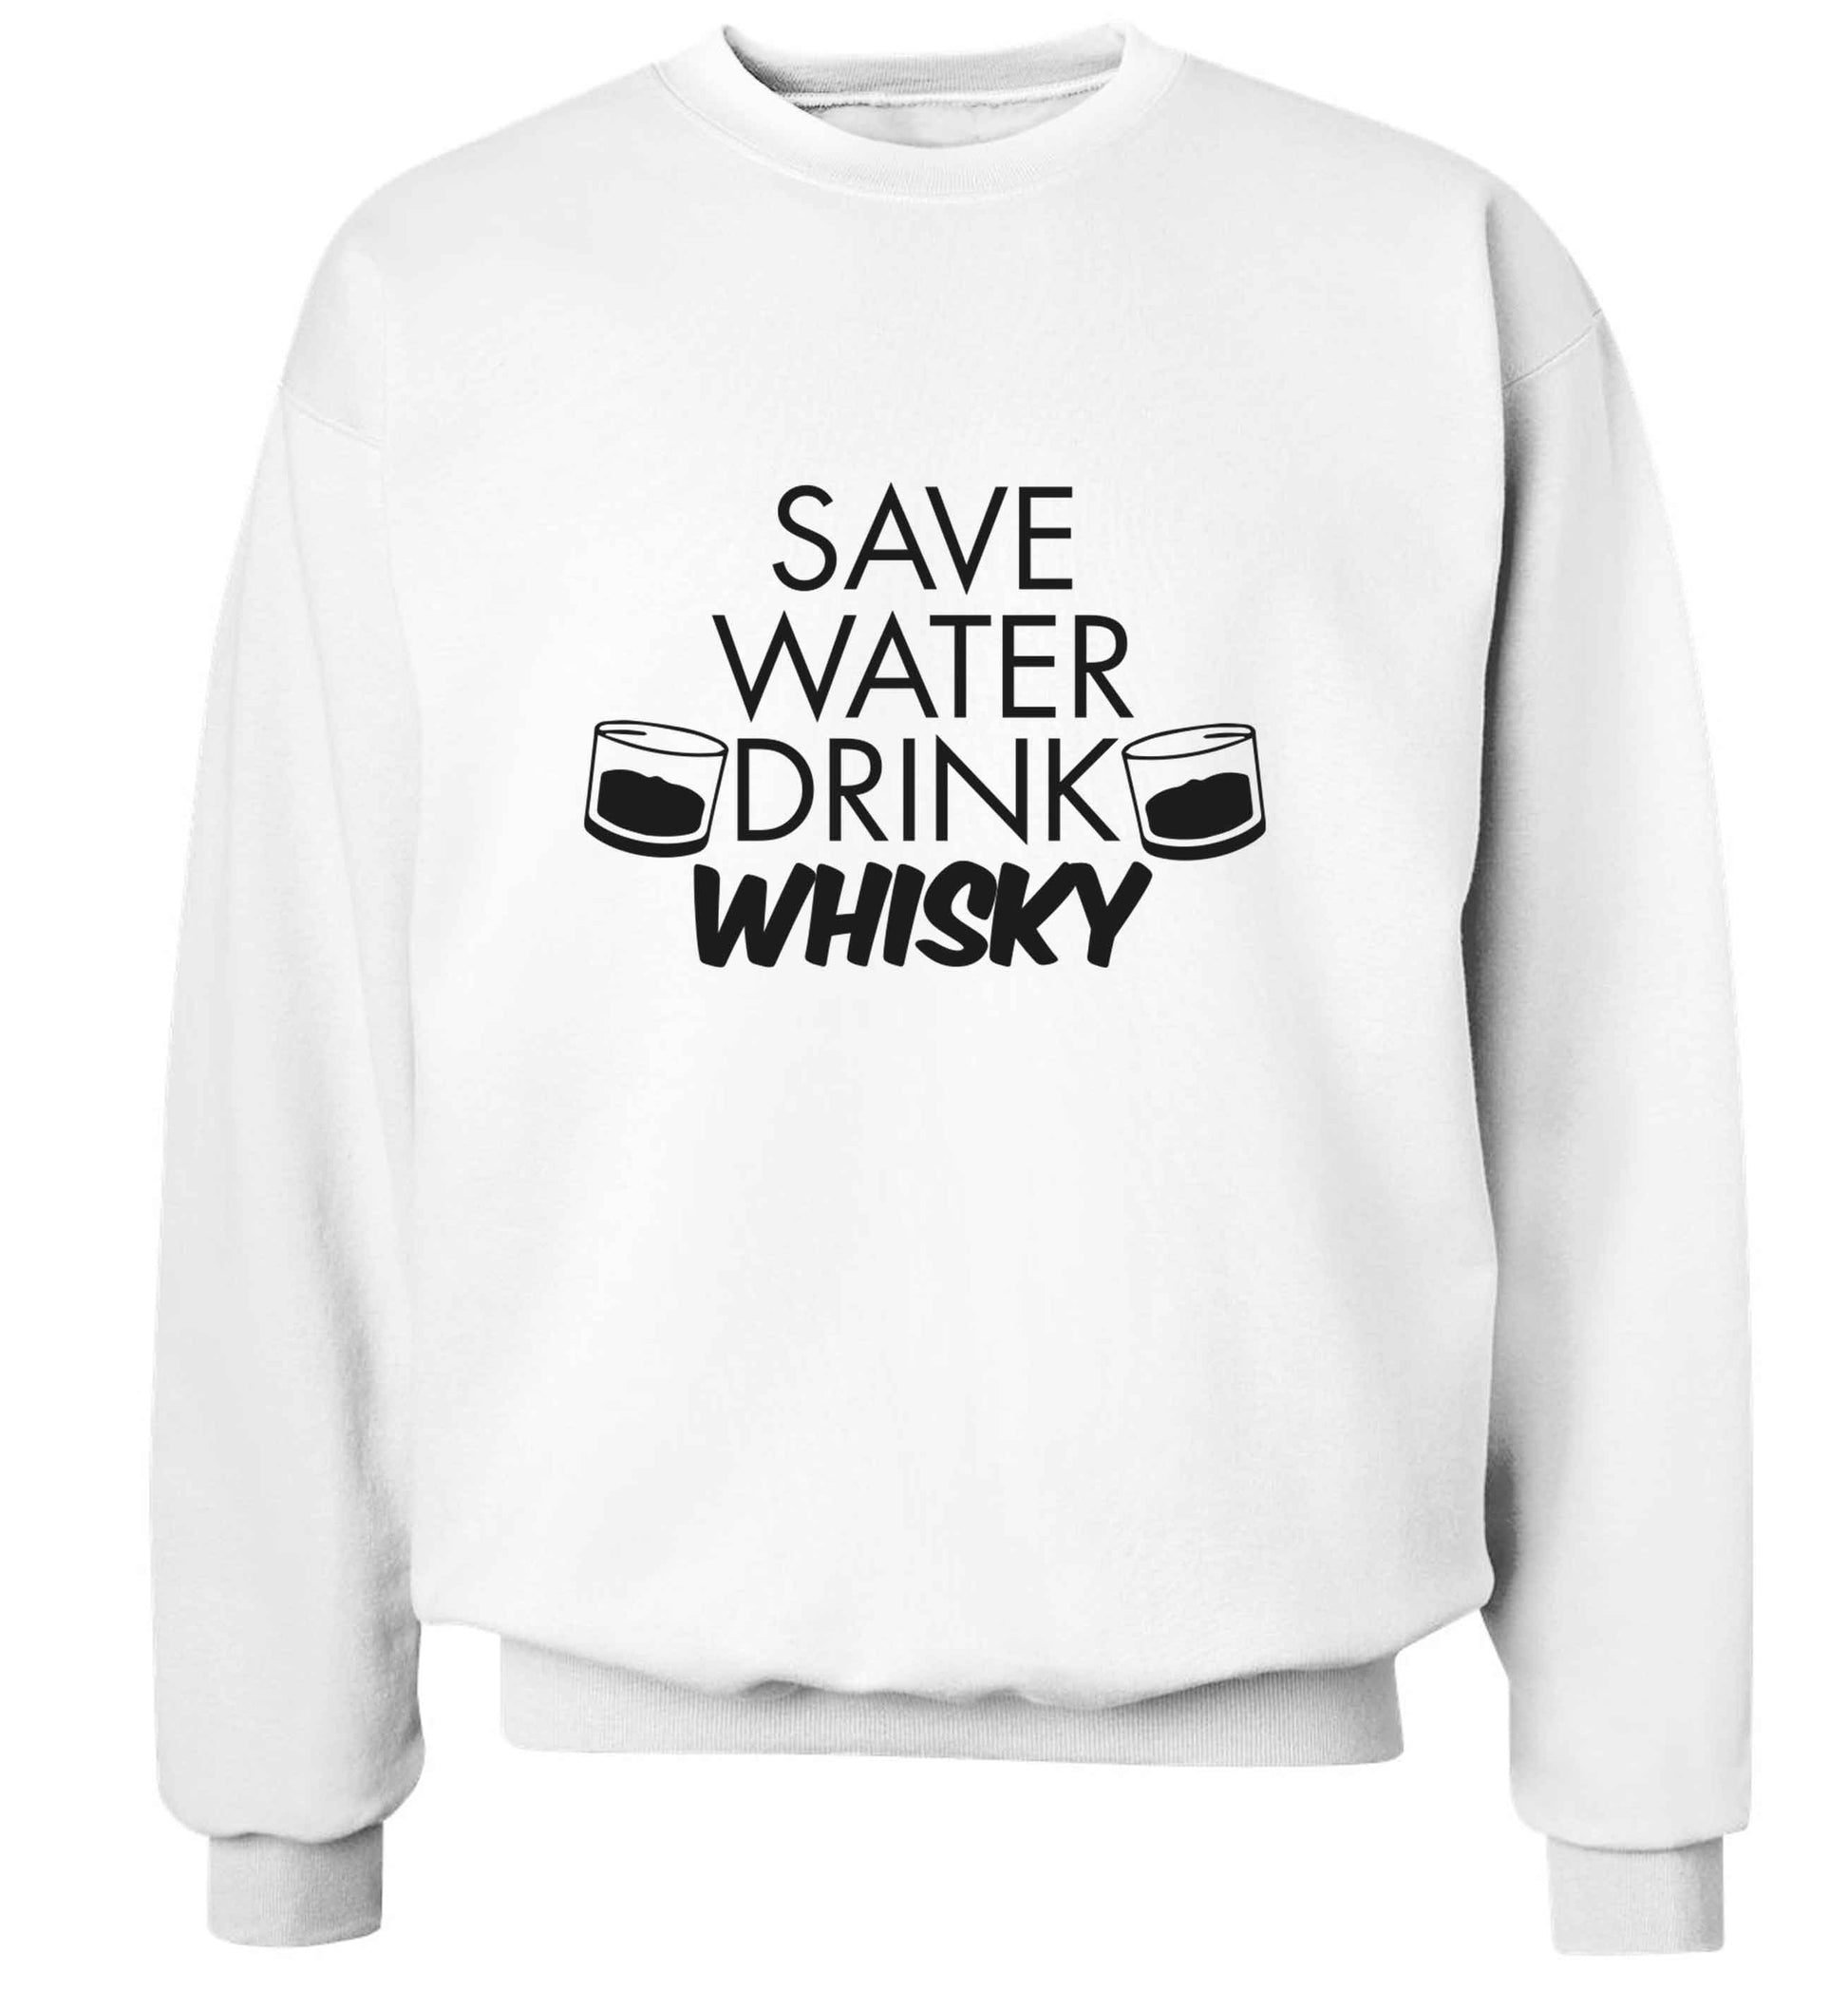 Save water drink whisky adult's unisex white sweater 2XL